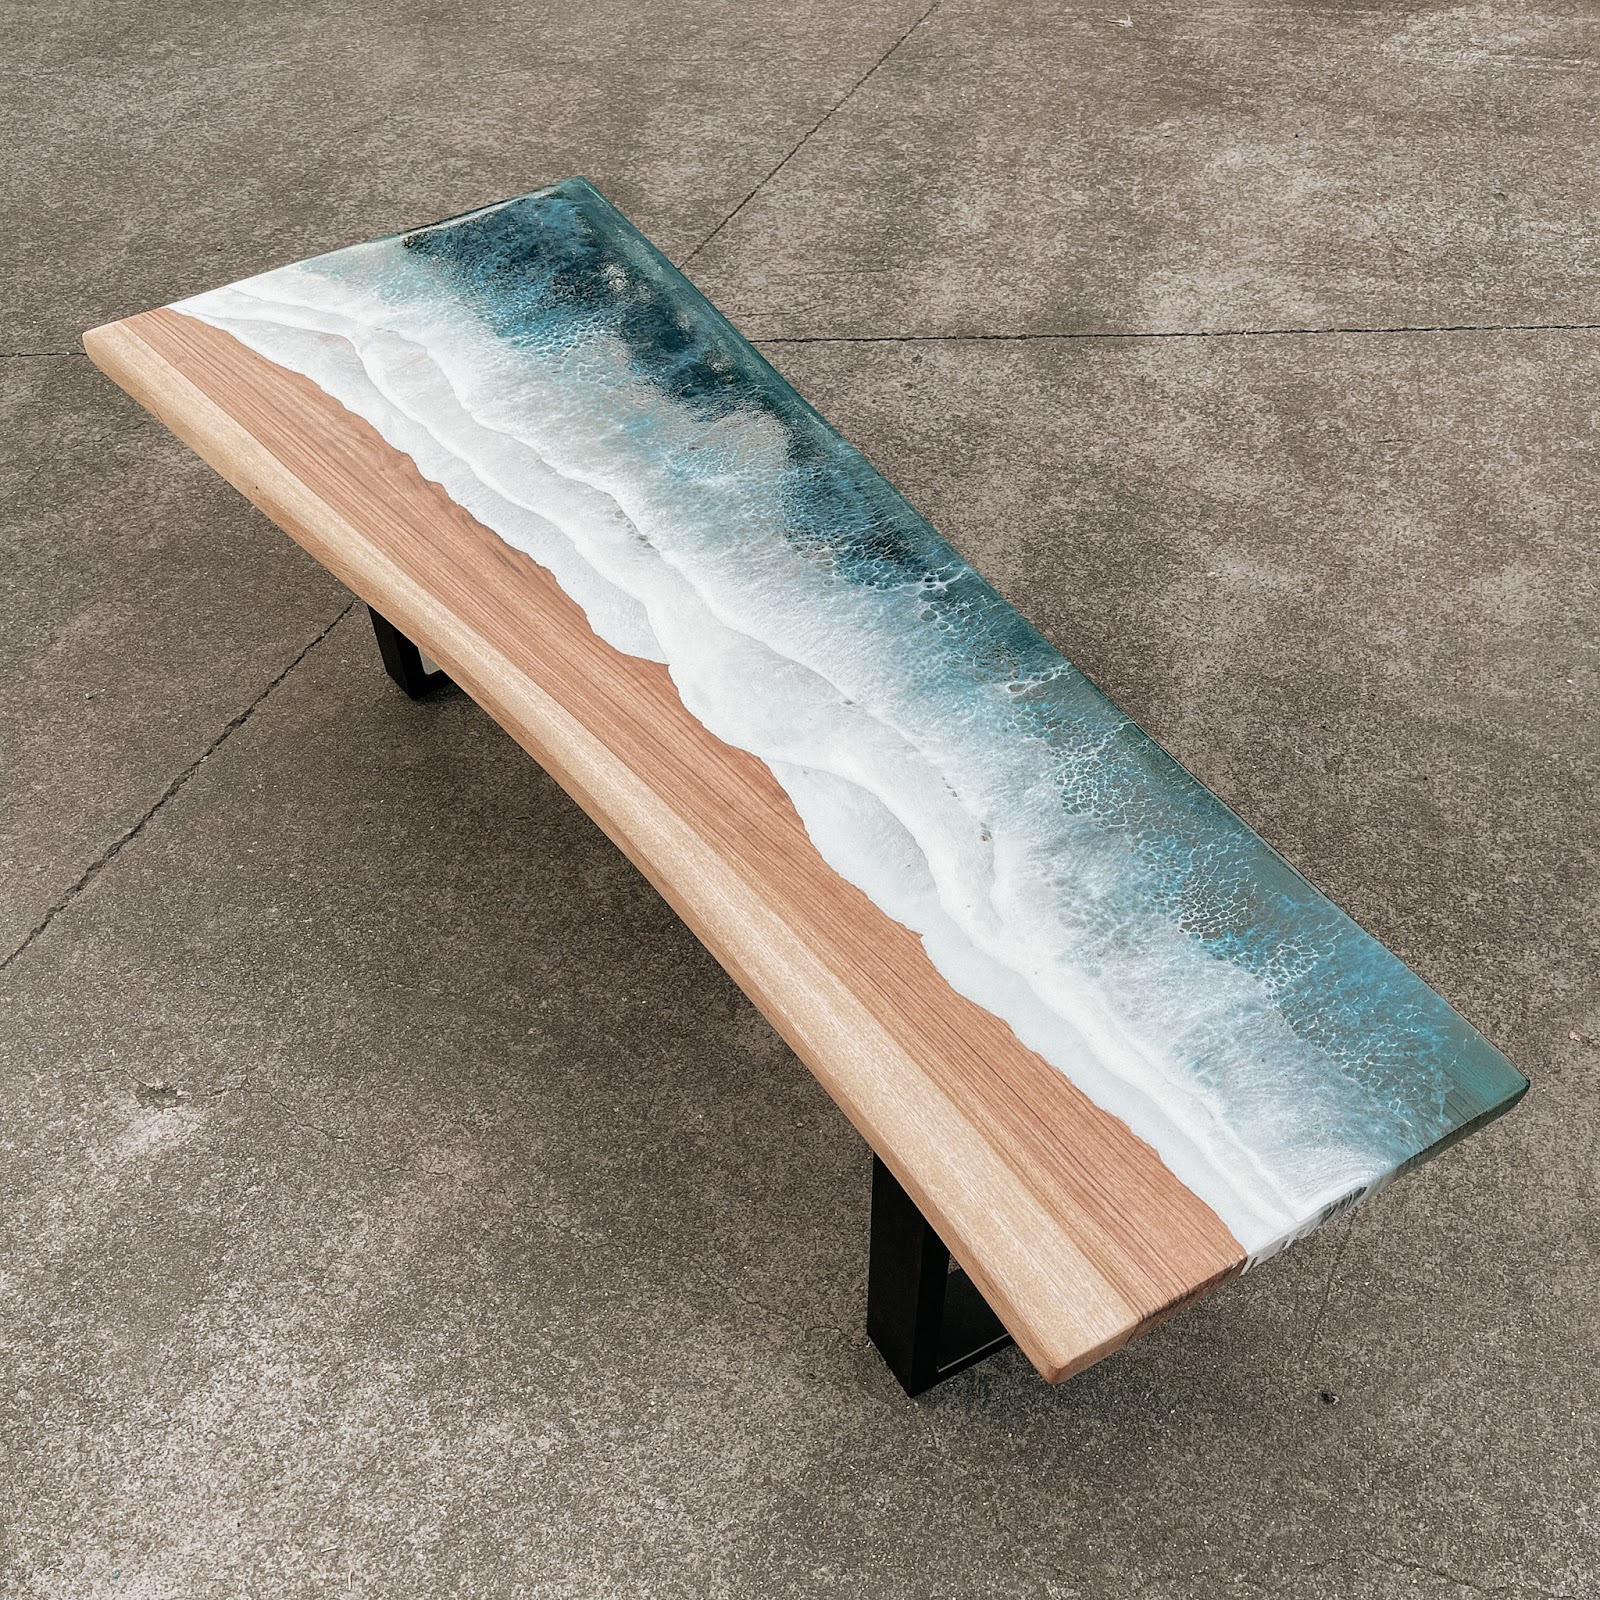 Natural Wood Table Vs Resin Table: Which is the best? - The Fifth Design